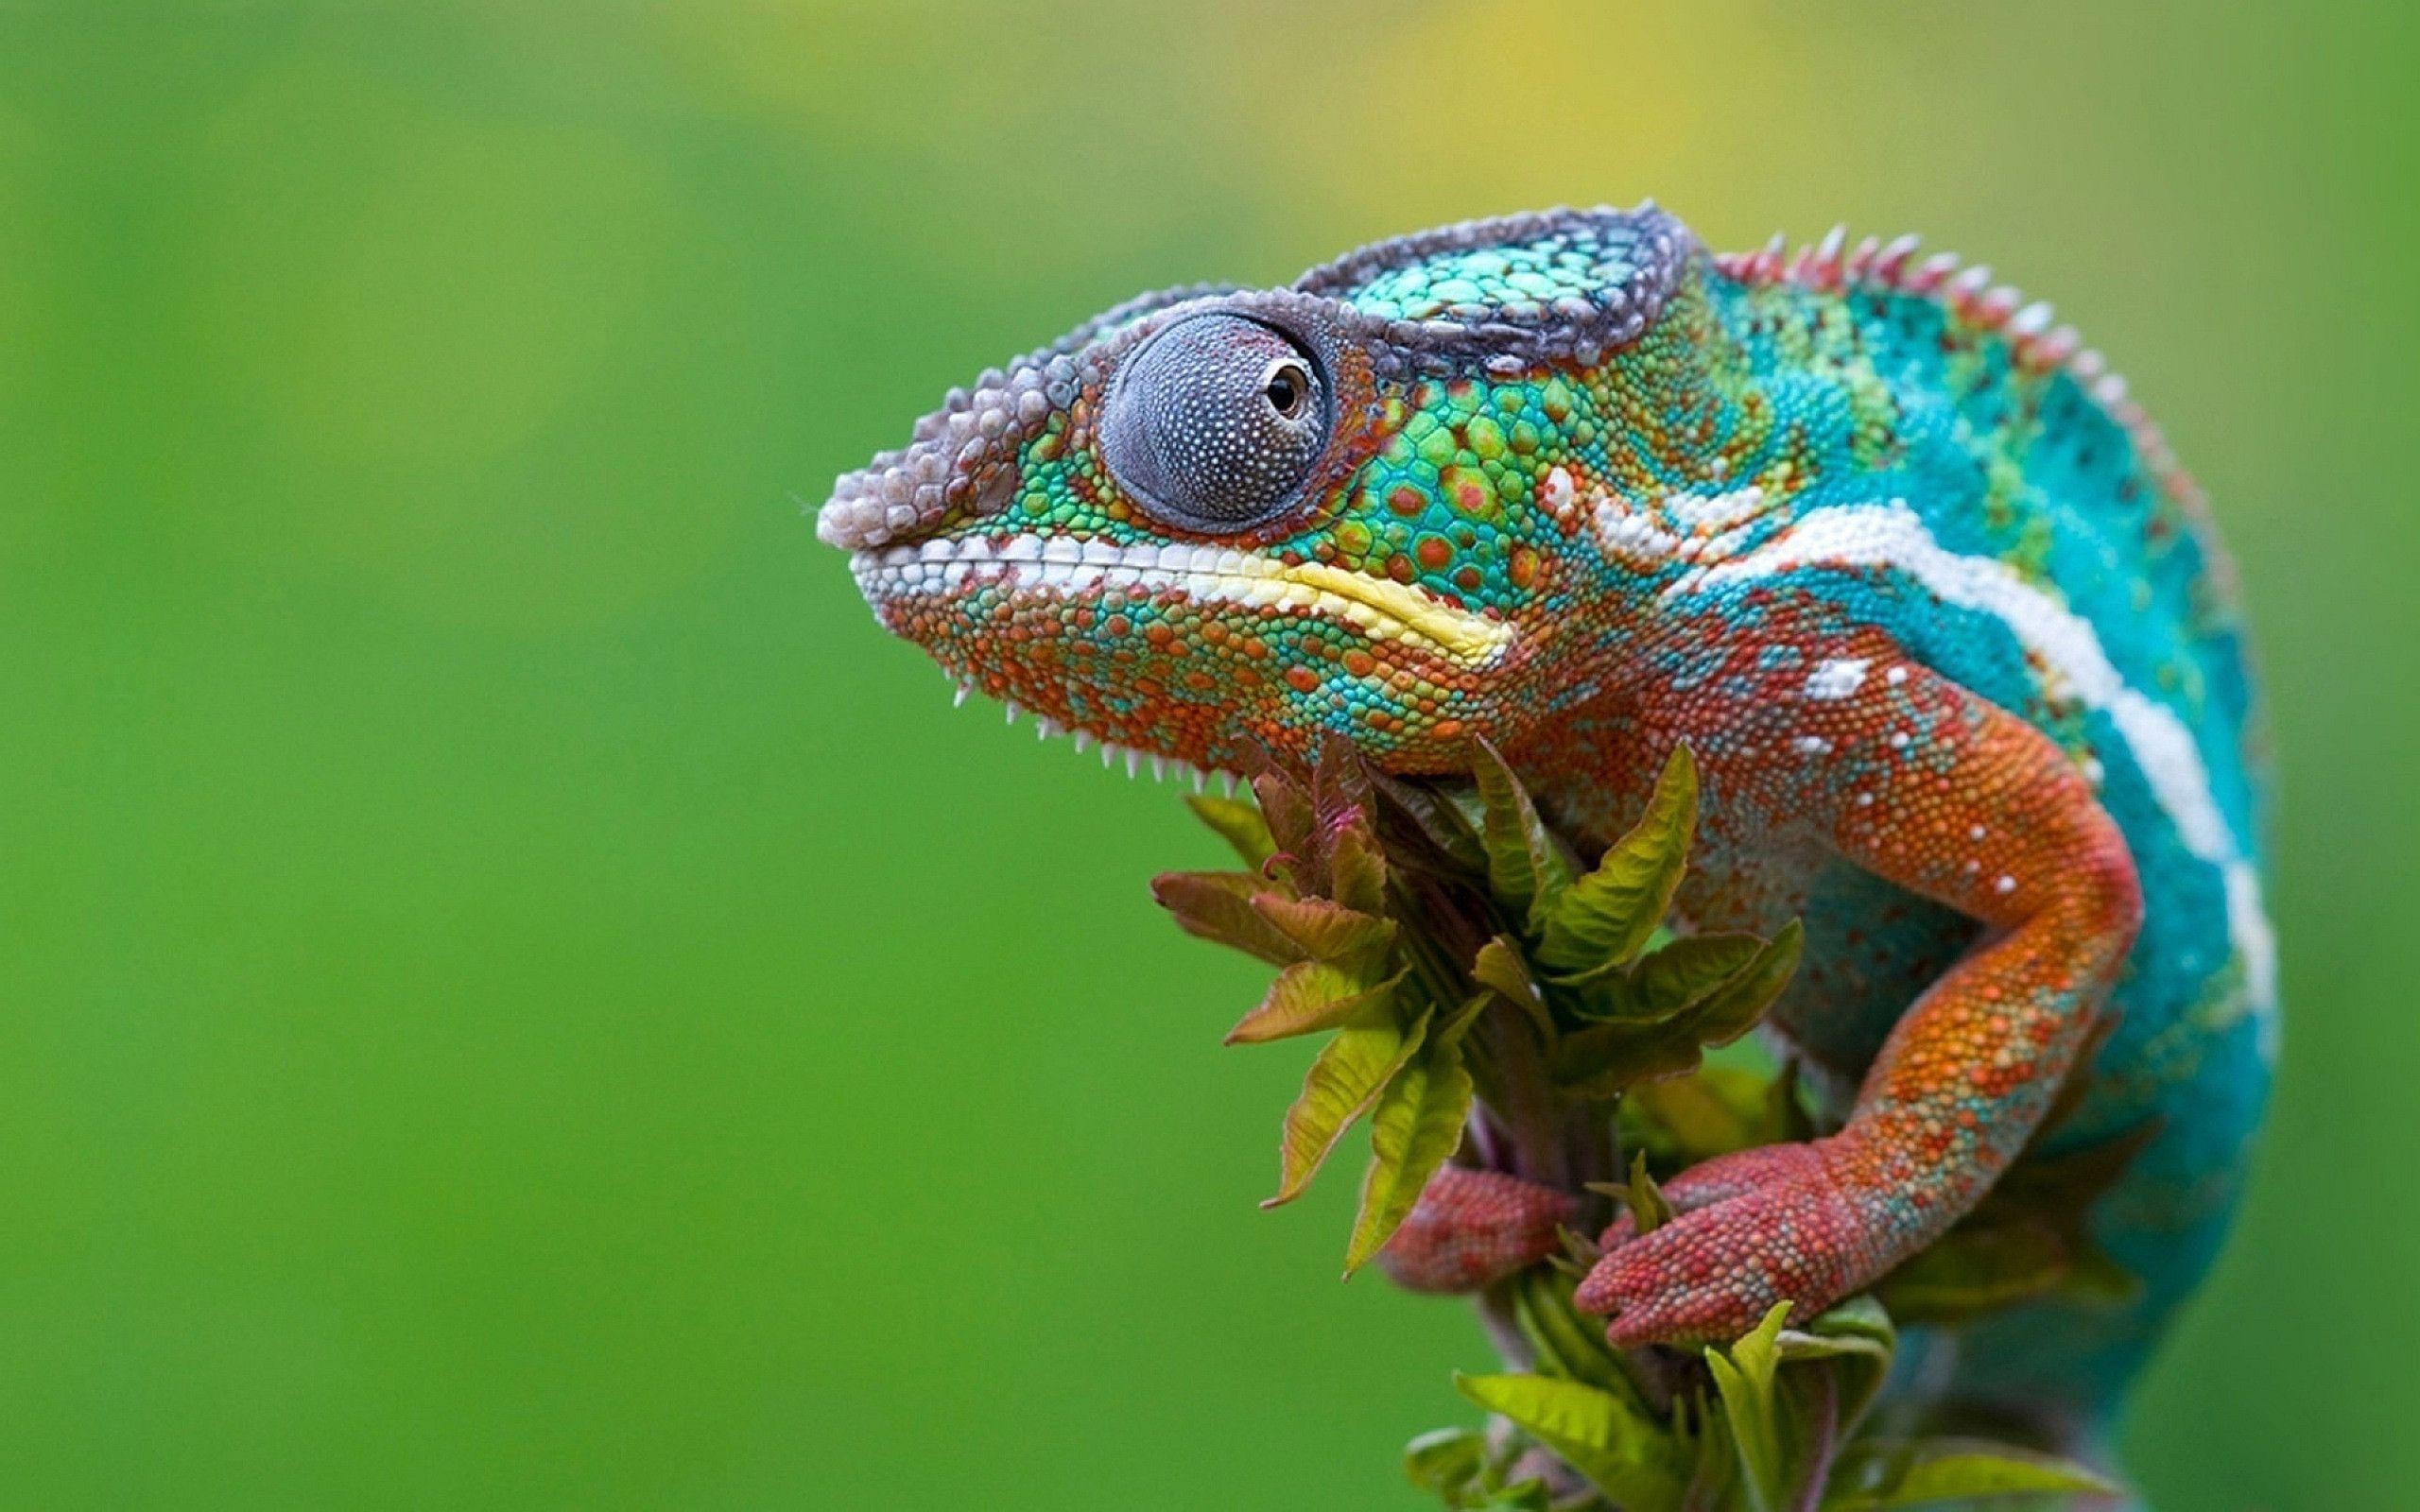 Chameleon Photos Download The BEST Free Chameleon Stock Photos  HD Images